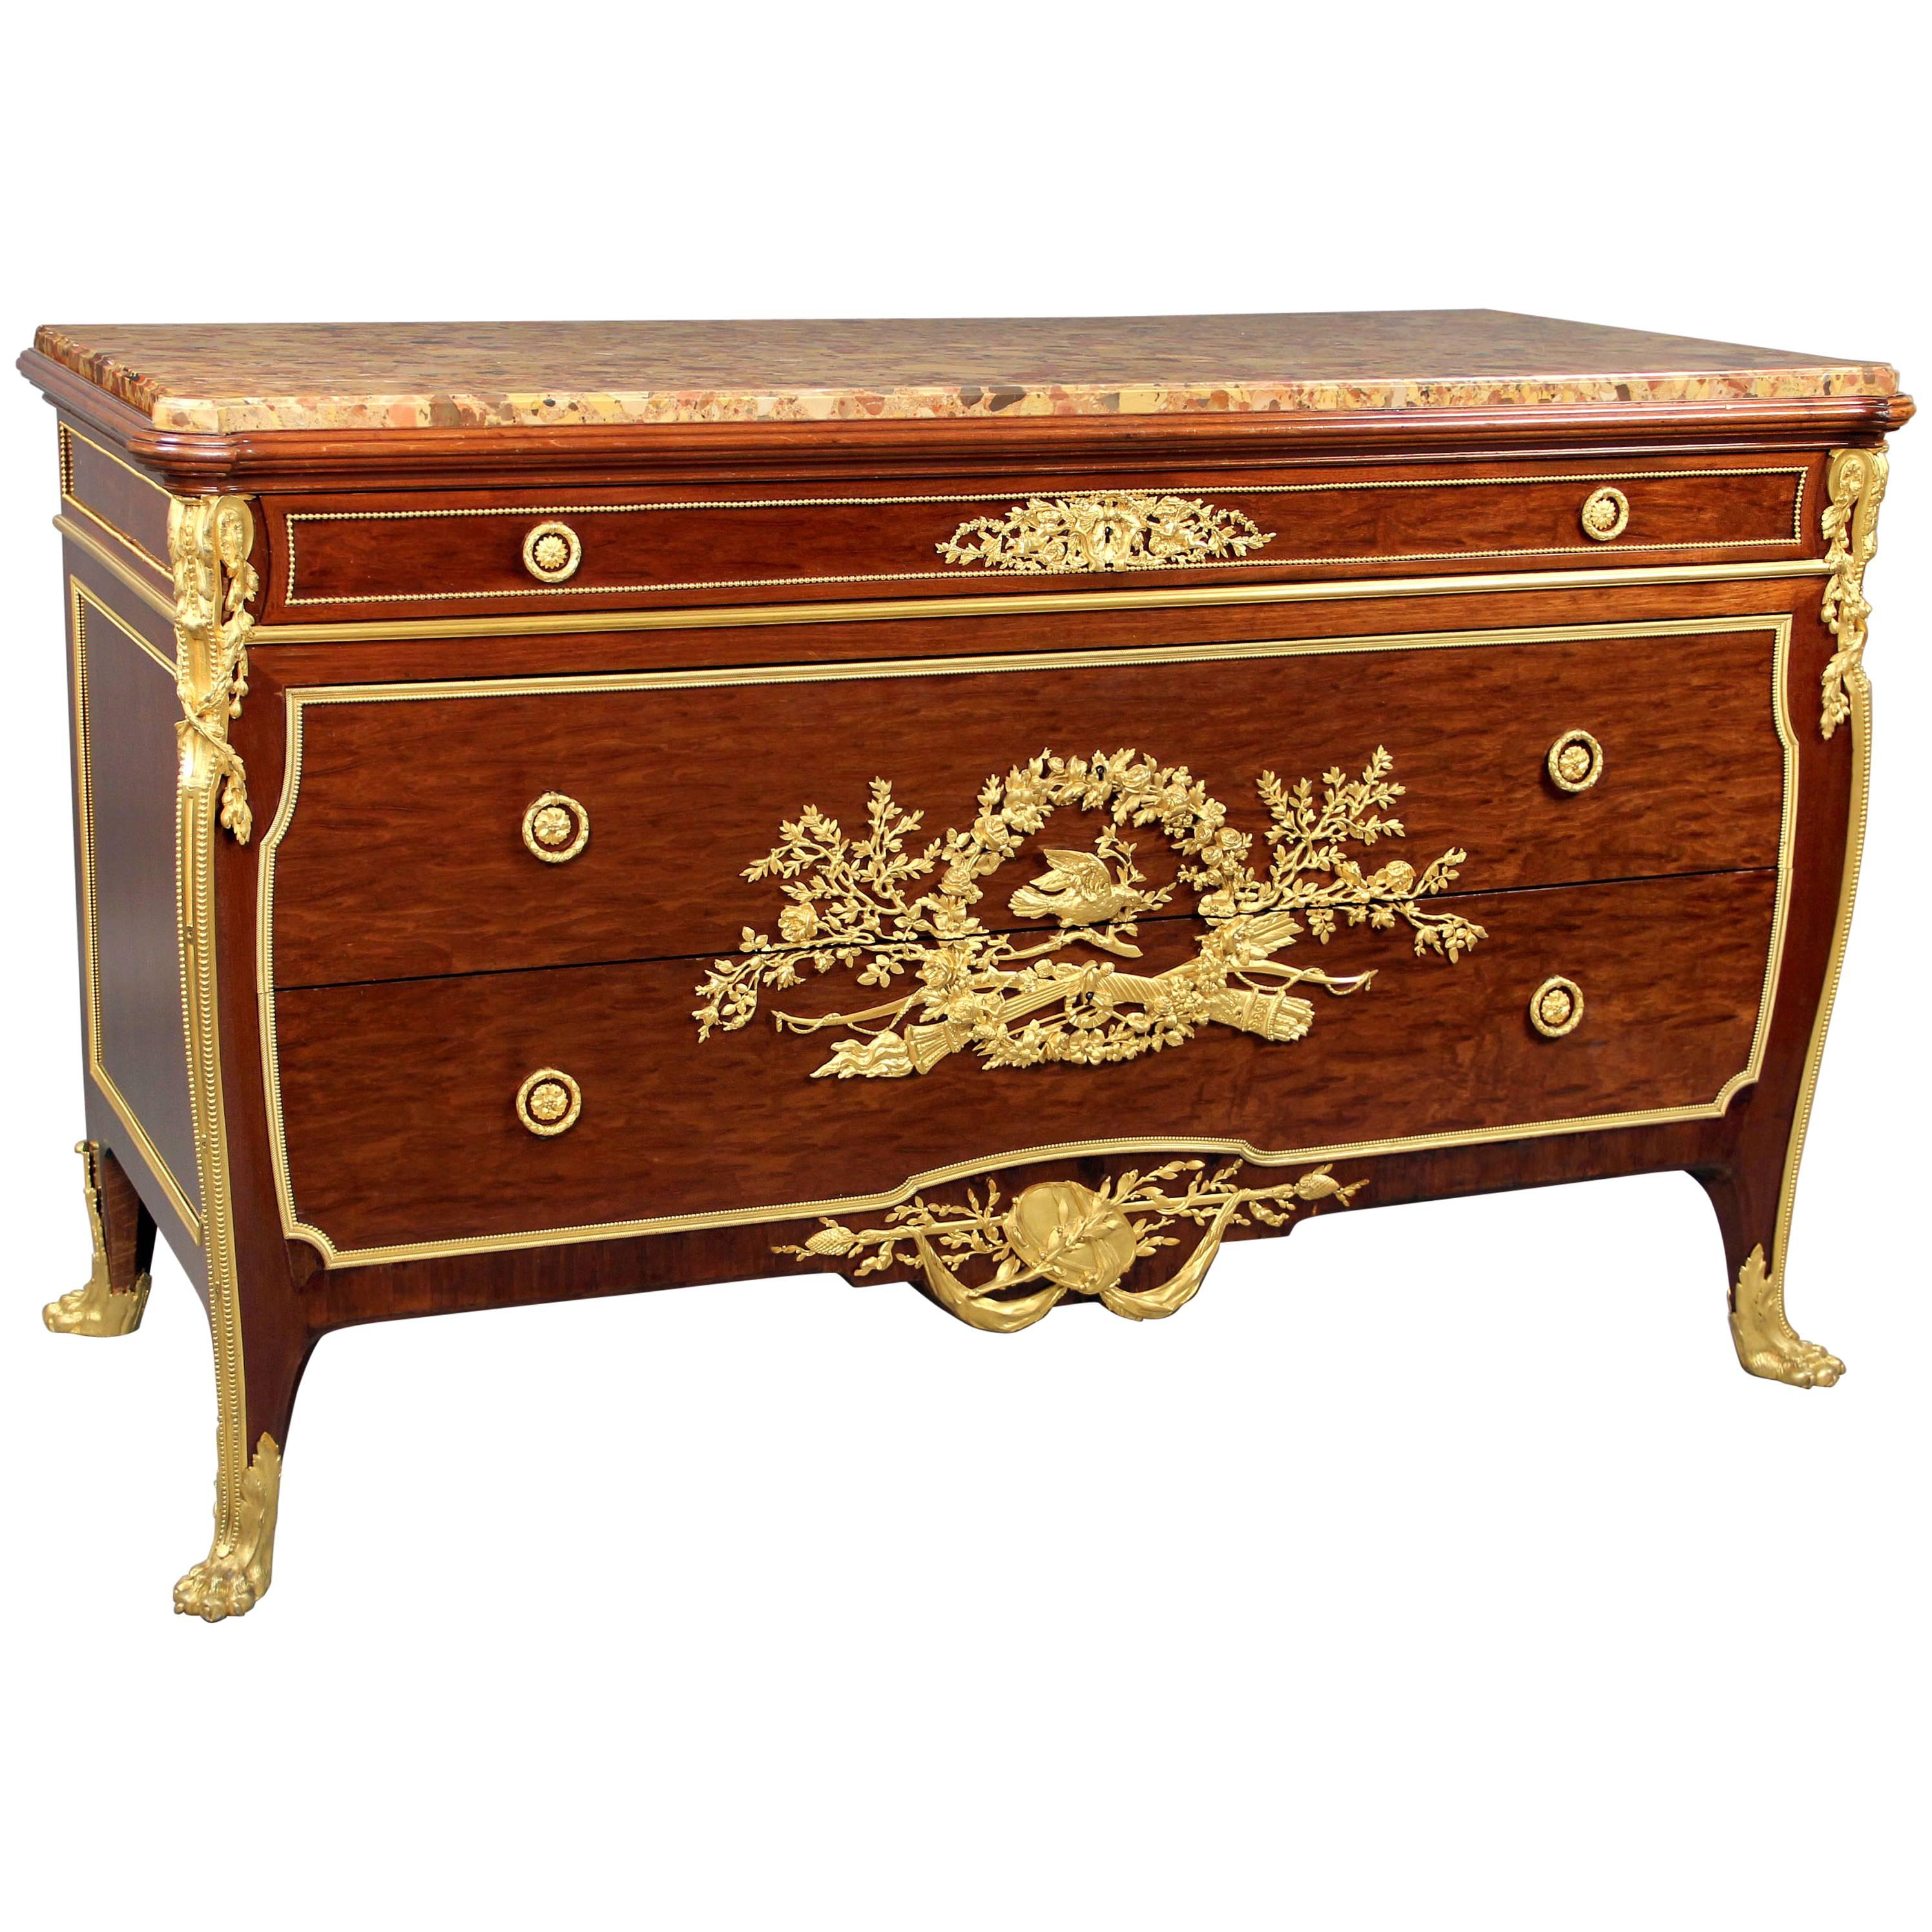 A Fantastic Late 19th Century Gilt Bronze Mounted Commode By François Linke